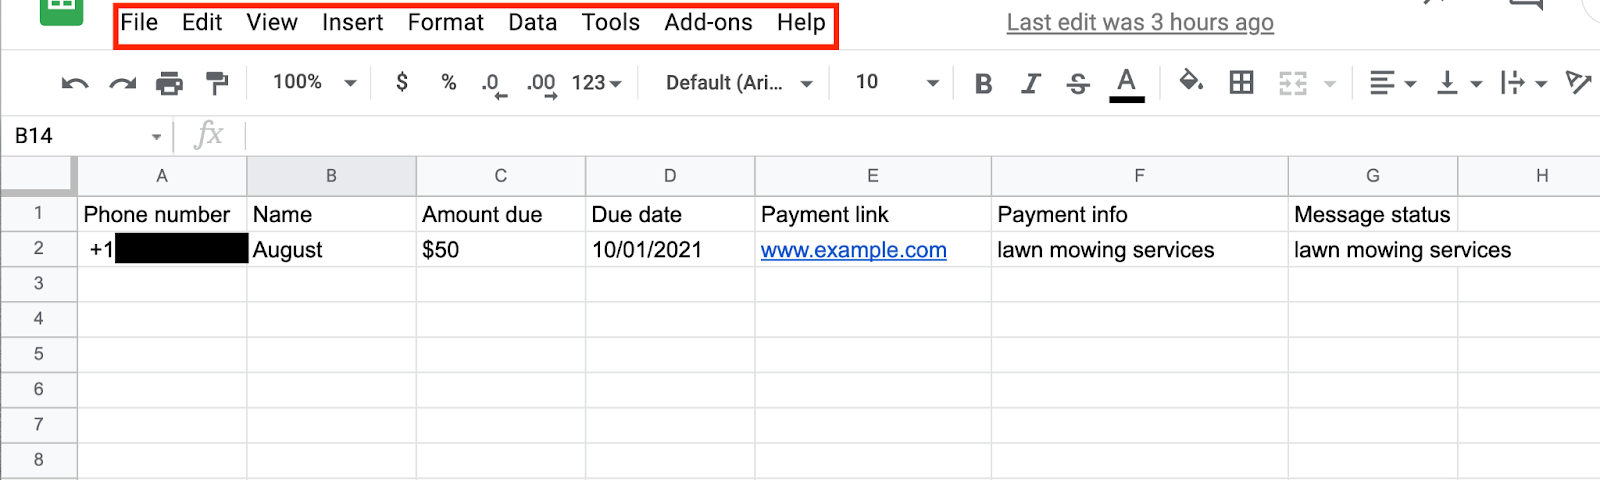 A screenshot showing where the main menus are located in Google Sheets